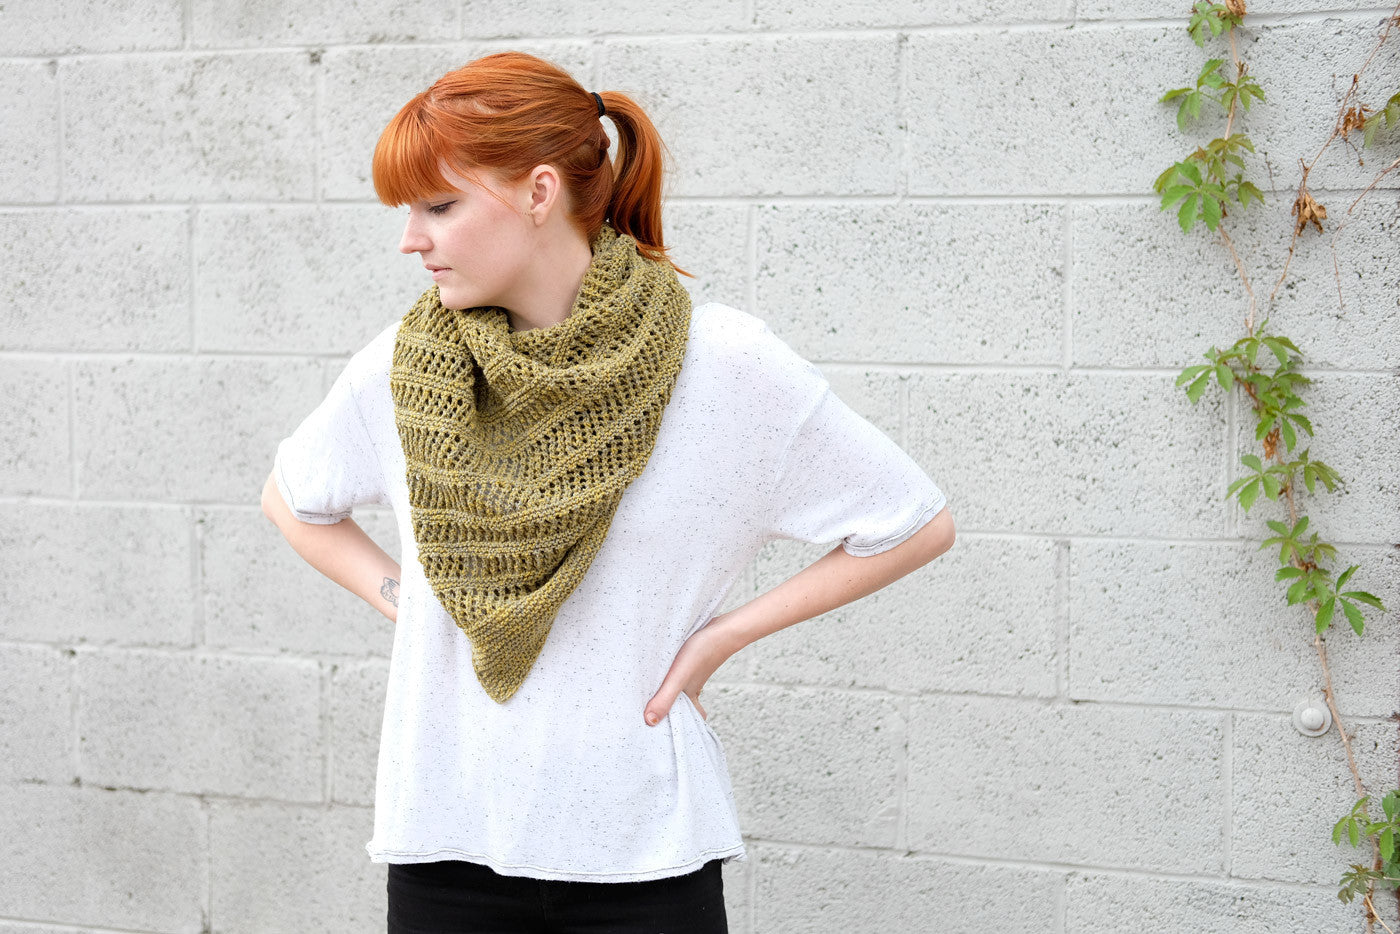 Lauren's Pairs Toujours Shawl in marled Spincycle Versus